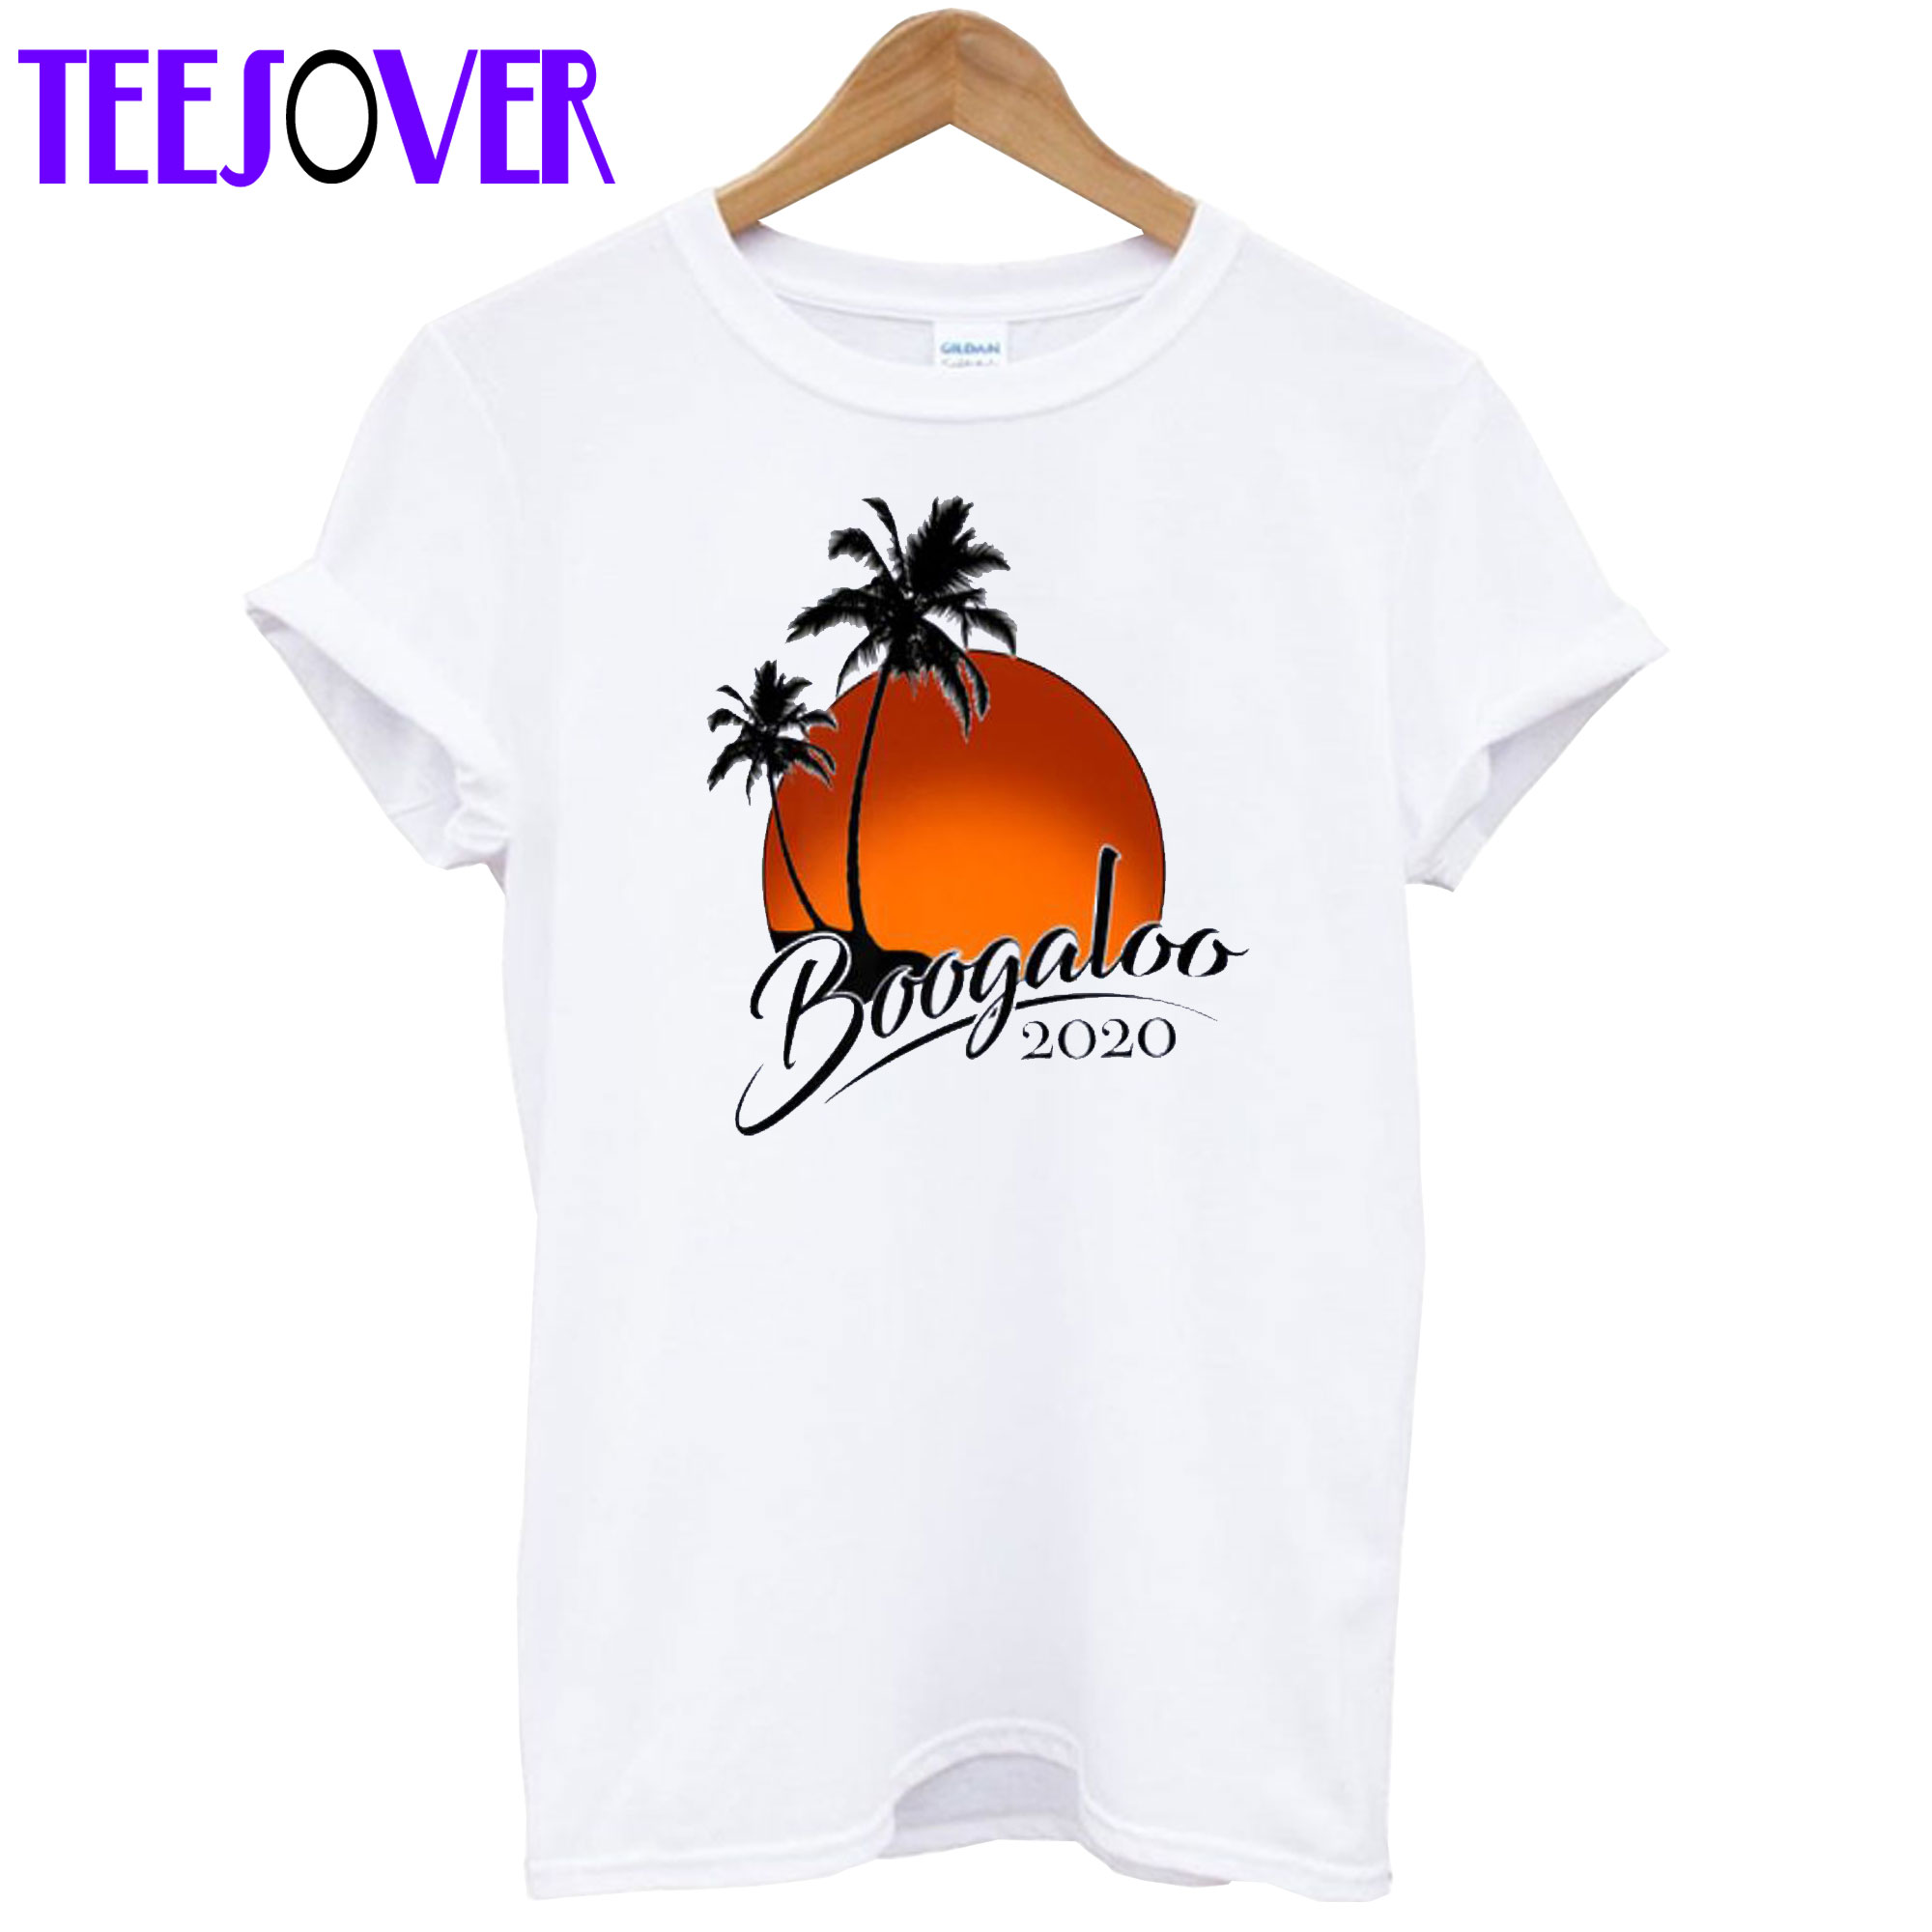 The Boogaloo Beach Party T-Shirt